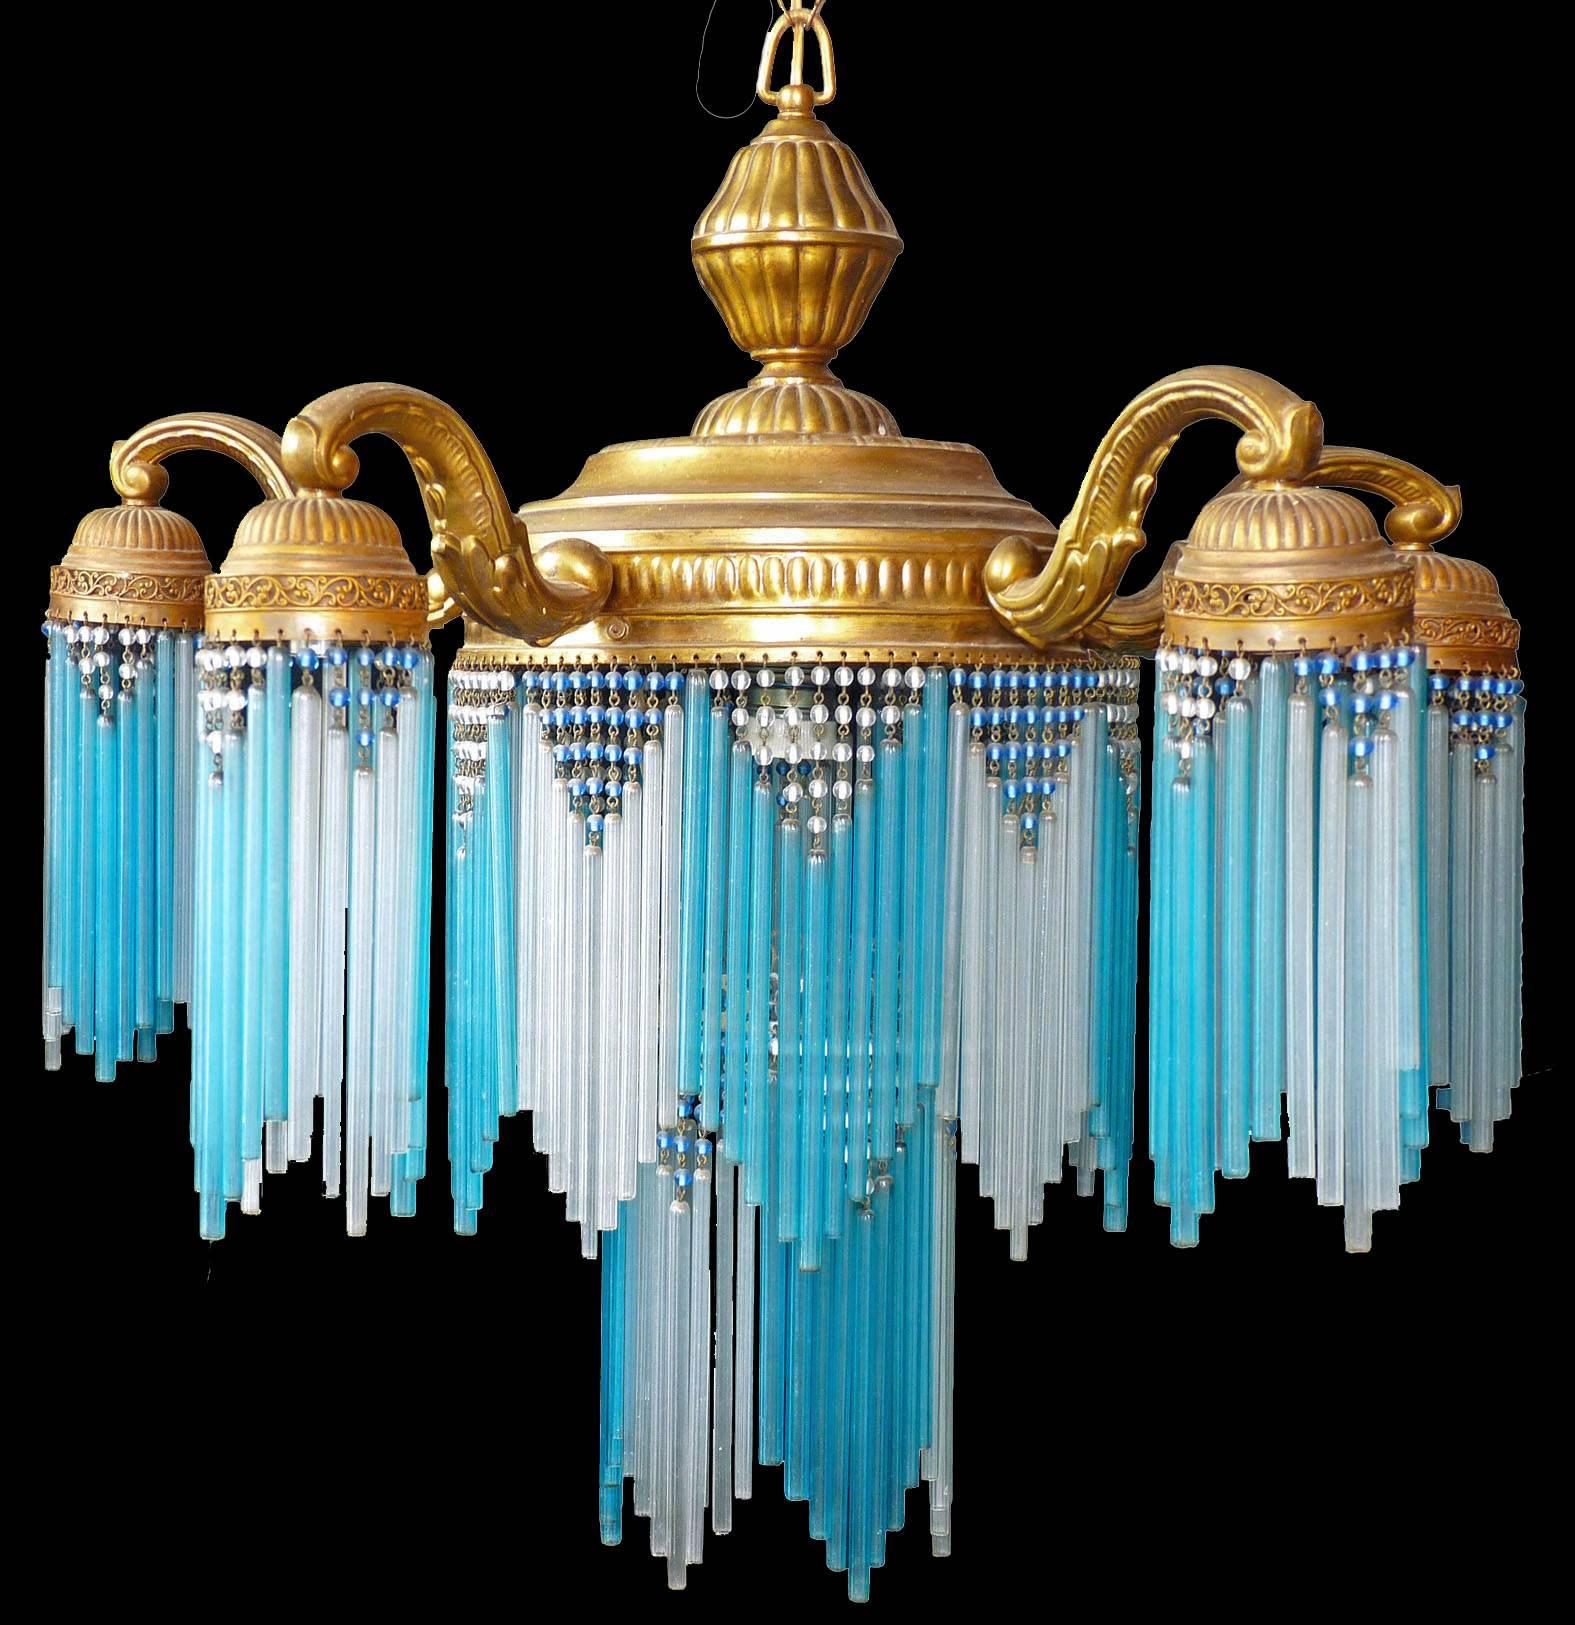 Gorgeous antique French chandelier in clear and turquoise blue beaded glass tubes, Art Deco / Art Nouveau
Pressed brass and fine glass straw tubes adorned with beads on the end of each tube. It has hundreds of glass straw